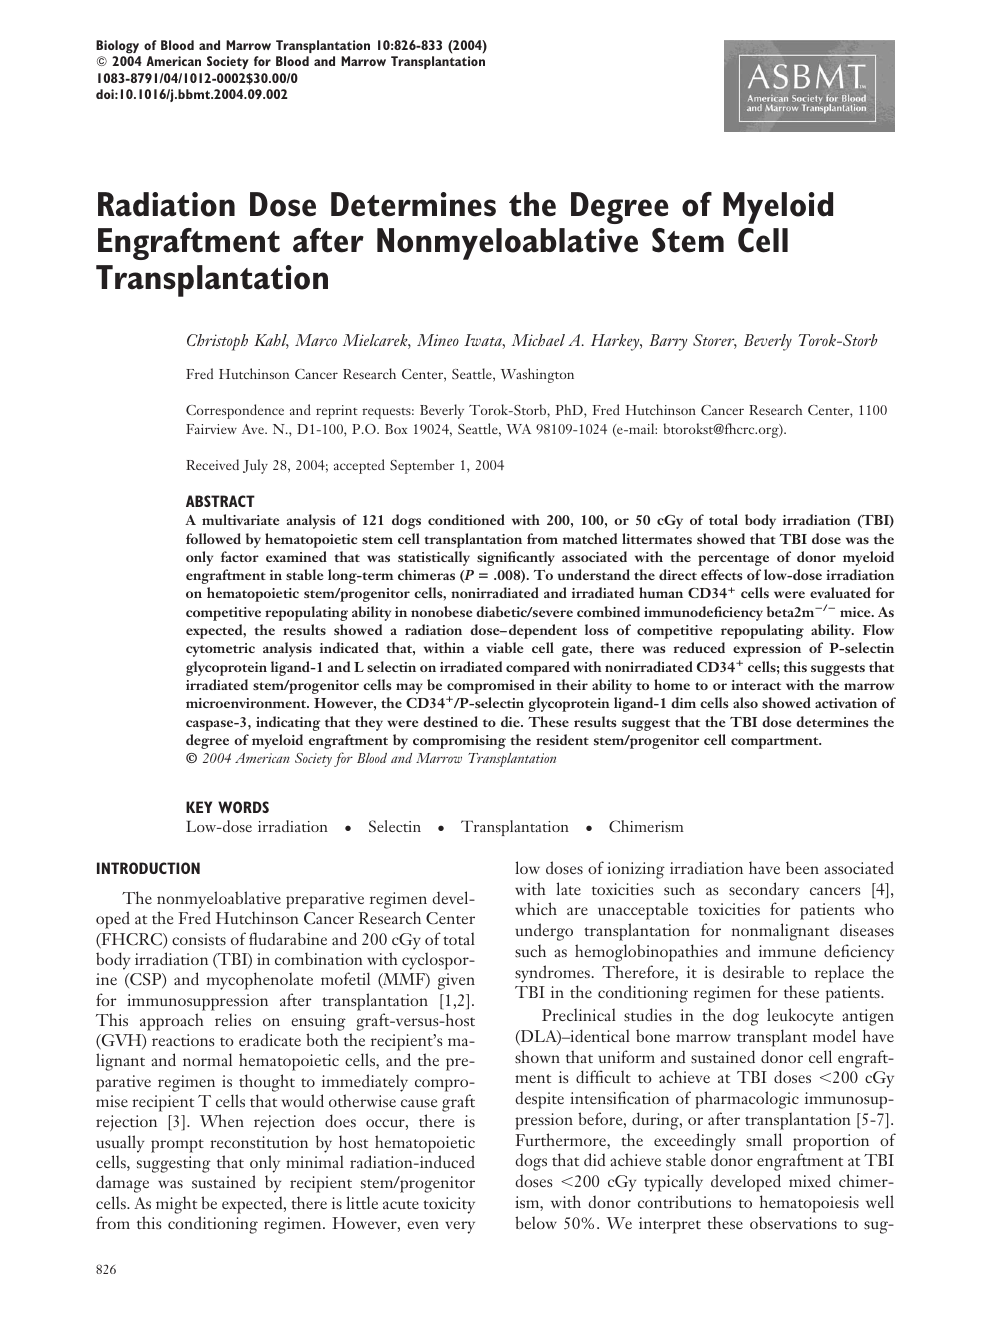 Radiation Dose Determines The Degree Of Myeloid Engraftment After Nonmyeloablative Stem Cell Transplantation Topic Of Research Paper In Biological Sciences Download Scholarly Article Pdf And Read For Free On Cyberleninka Open